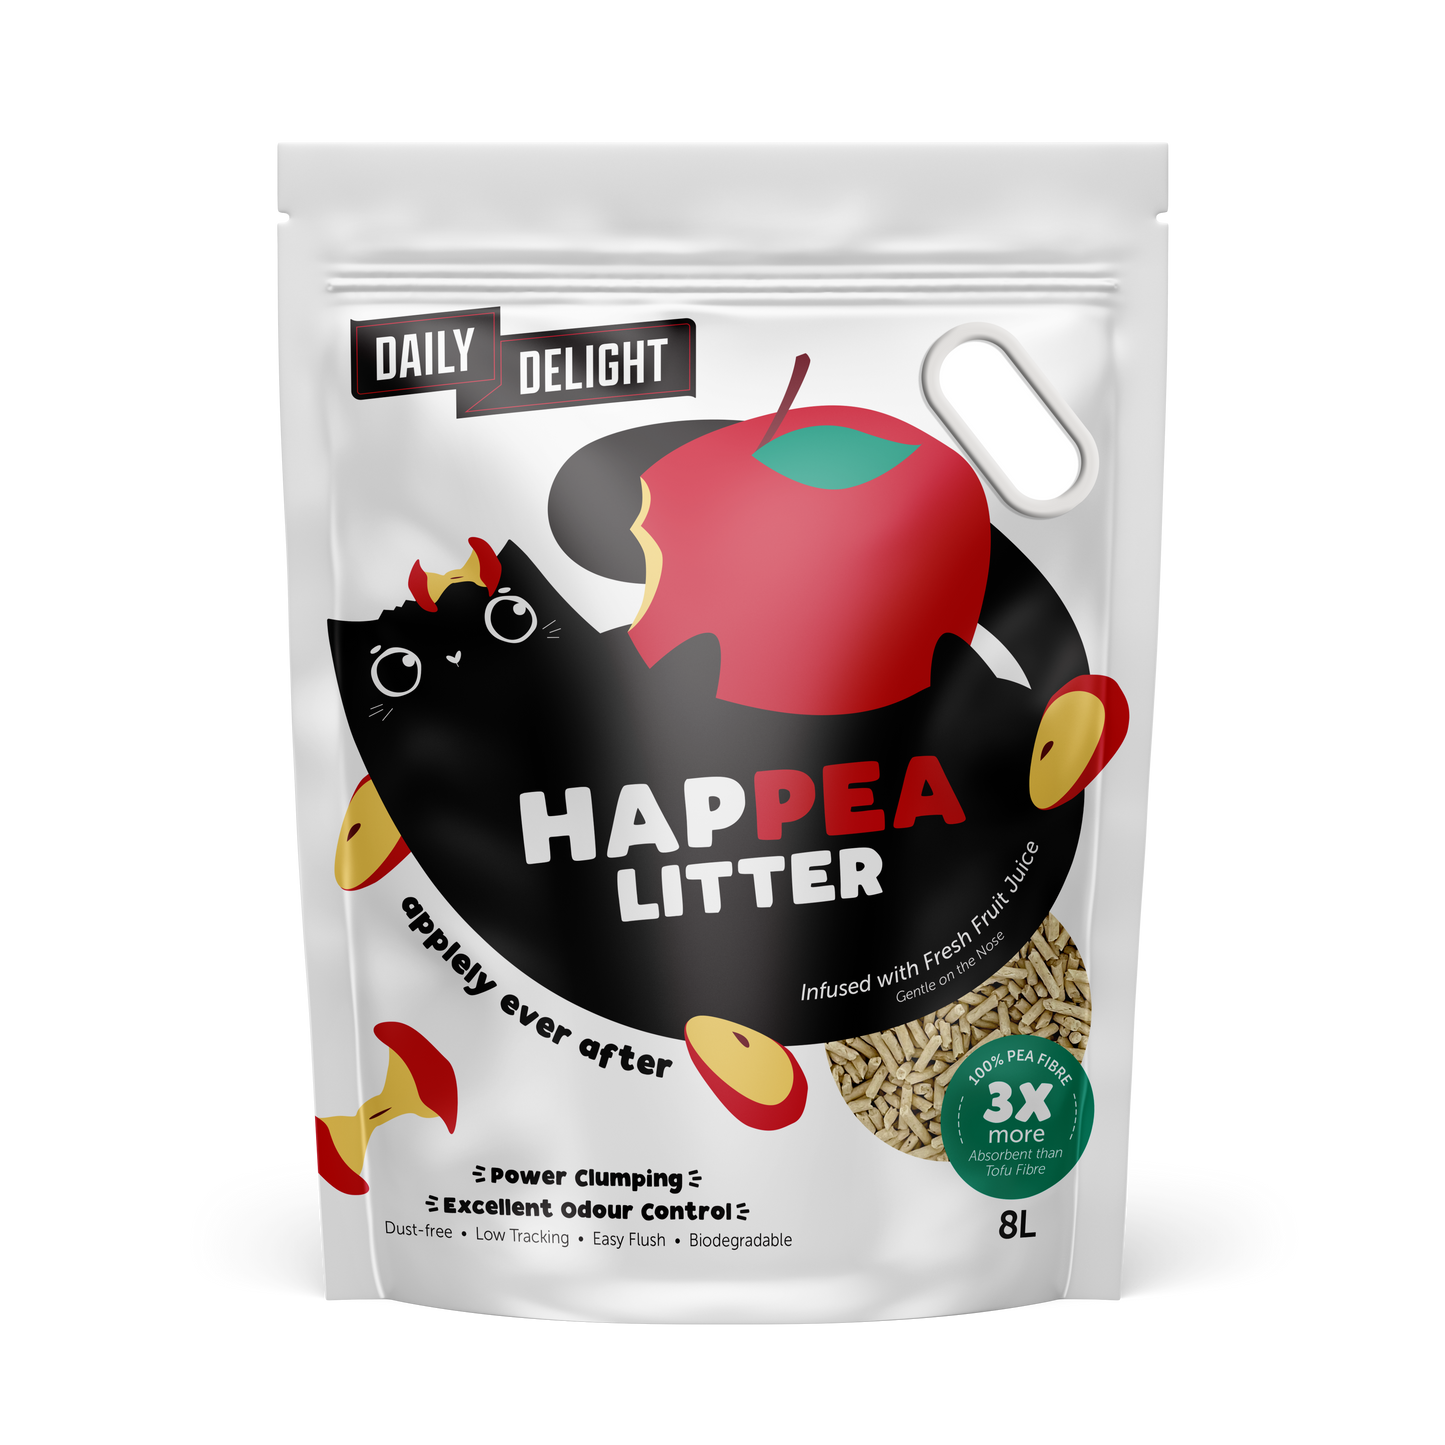 Daily Delight Happea Litter Applely Ever After Apple Scented Cat Litter 8L (Bundle of 6)